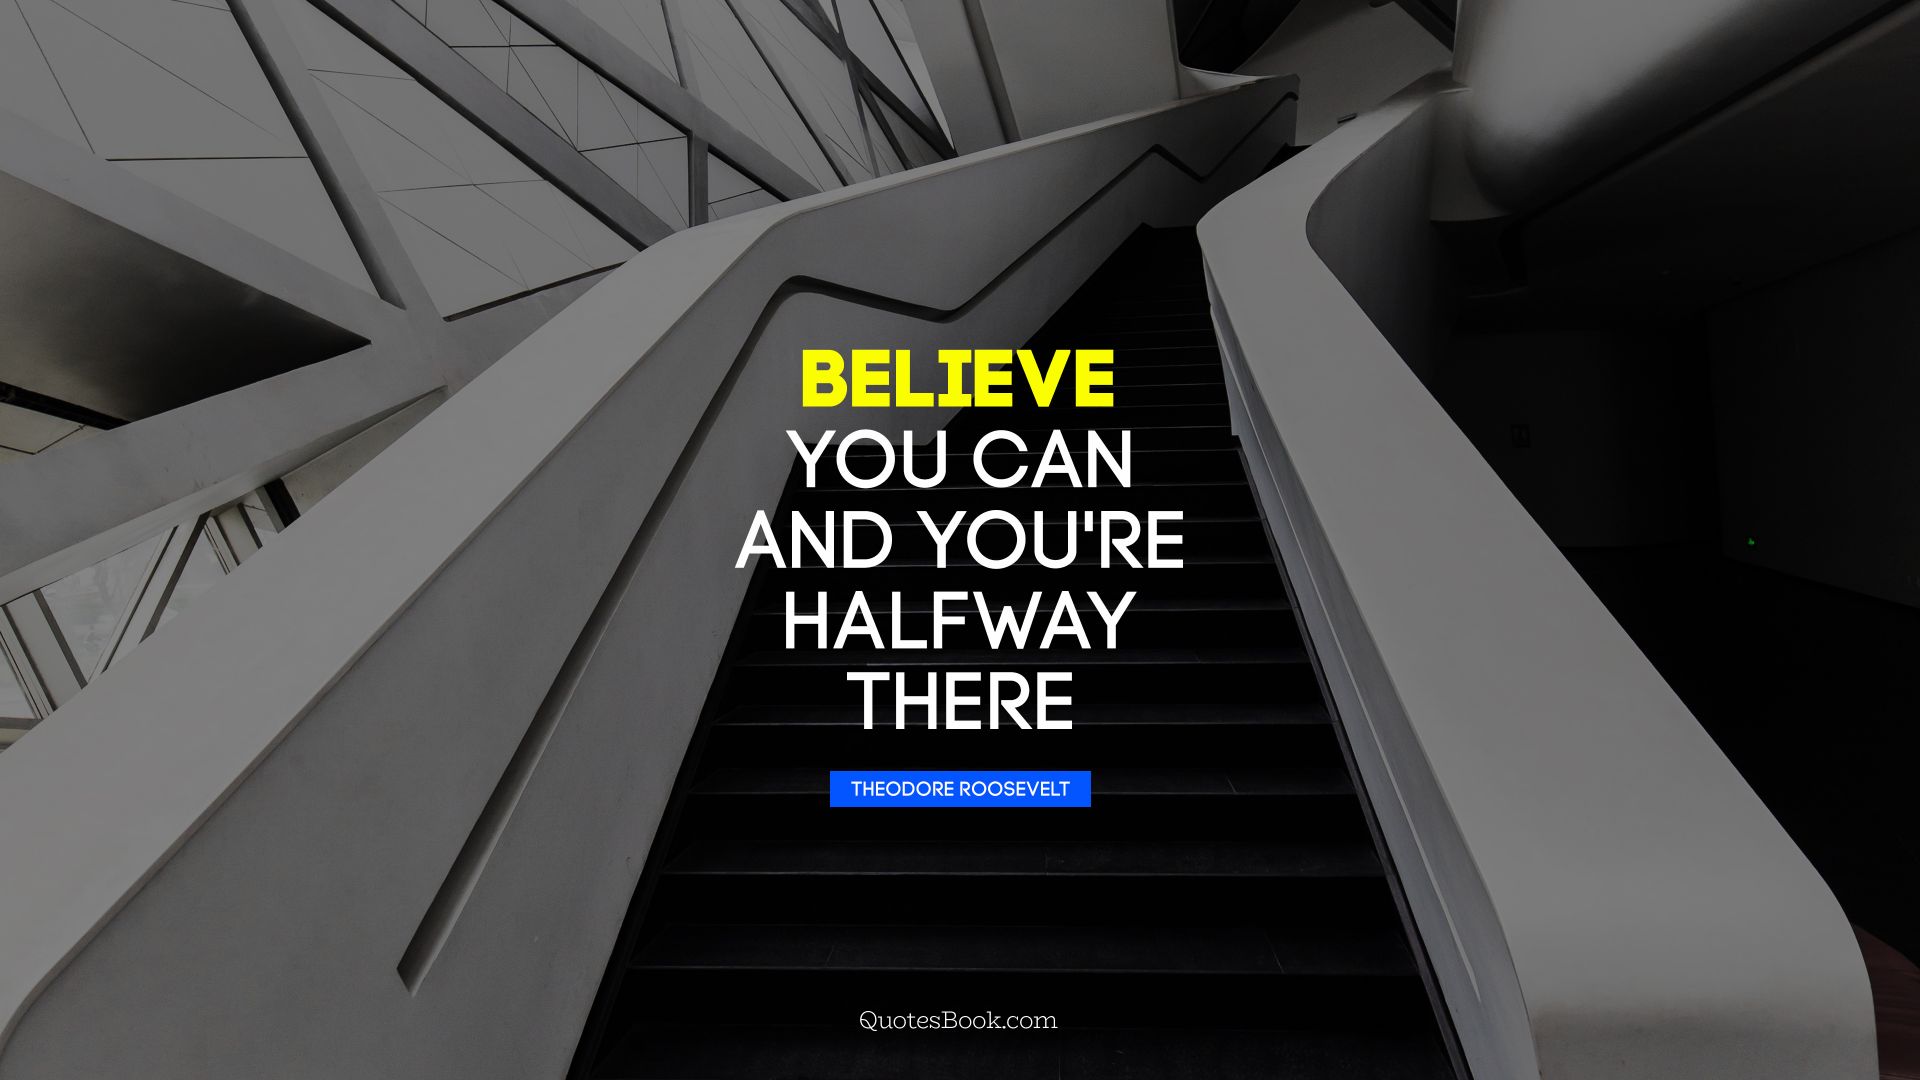 Believe you can and you're halfway 
there. - Quote by Theodore Roosevelt